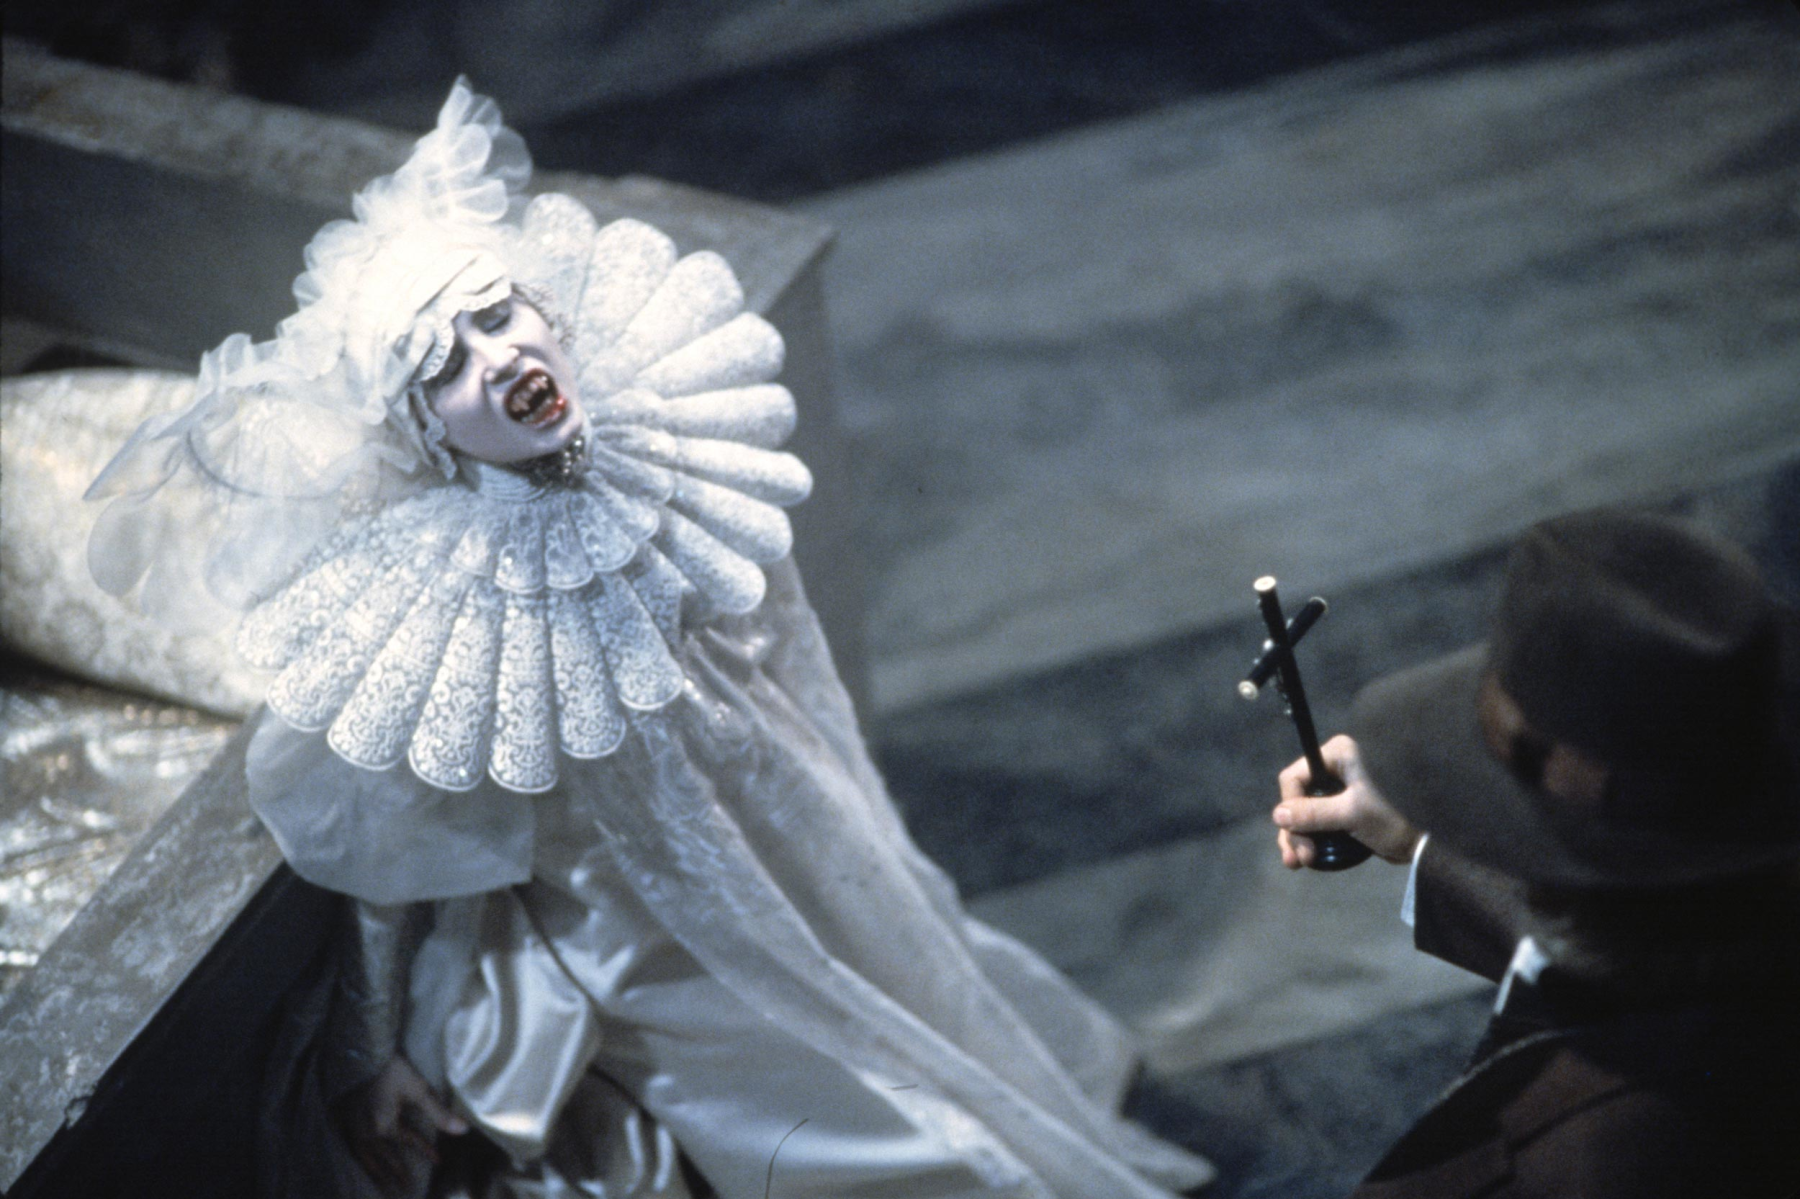 Sadie Frost in a scene from <i>Bram Stoker's Dracula</i>, 1992. Photo credit: Ralph Nelson. Eiko Ishioka papers, Margaret Herrick Library, Academy of Motion Picture Arts and Sciences.